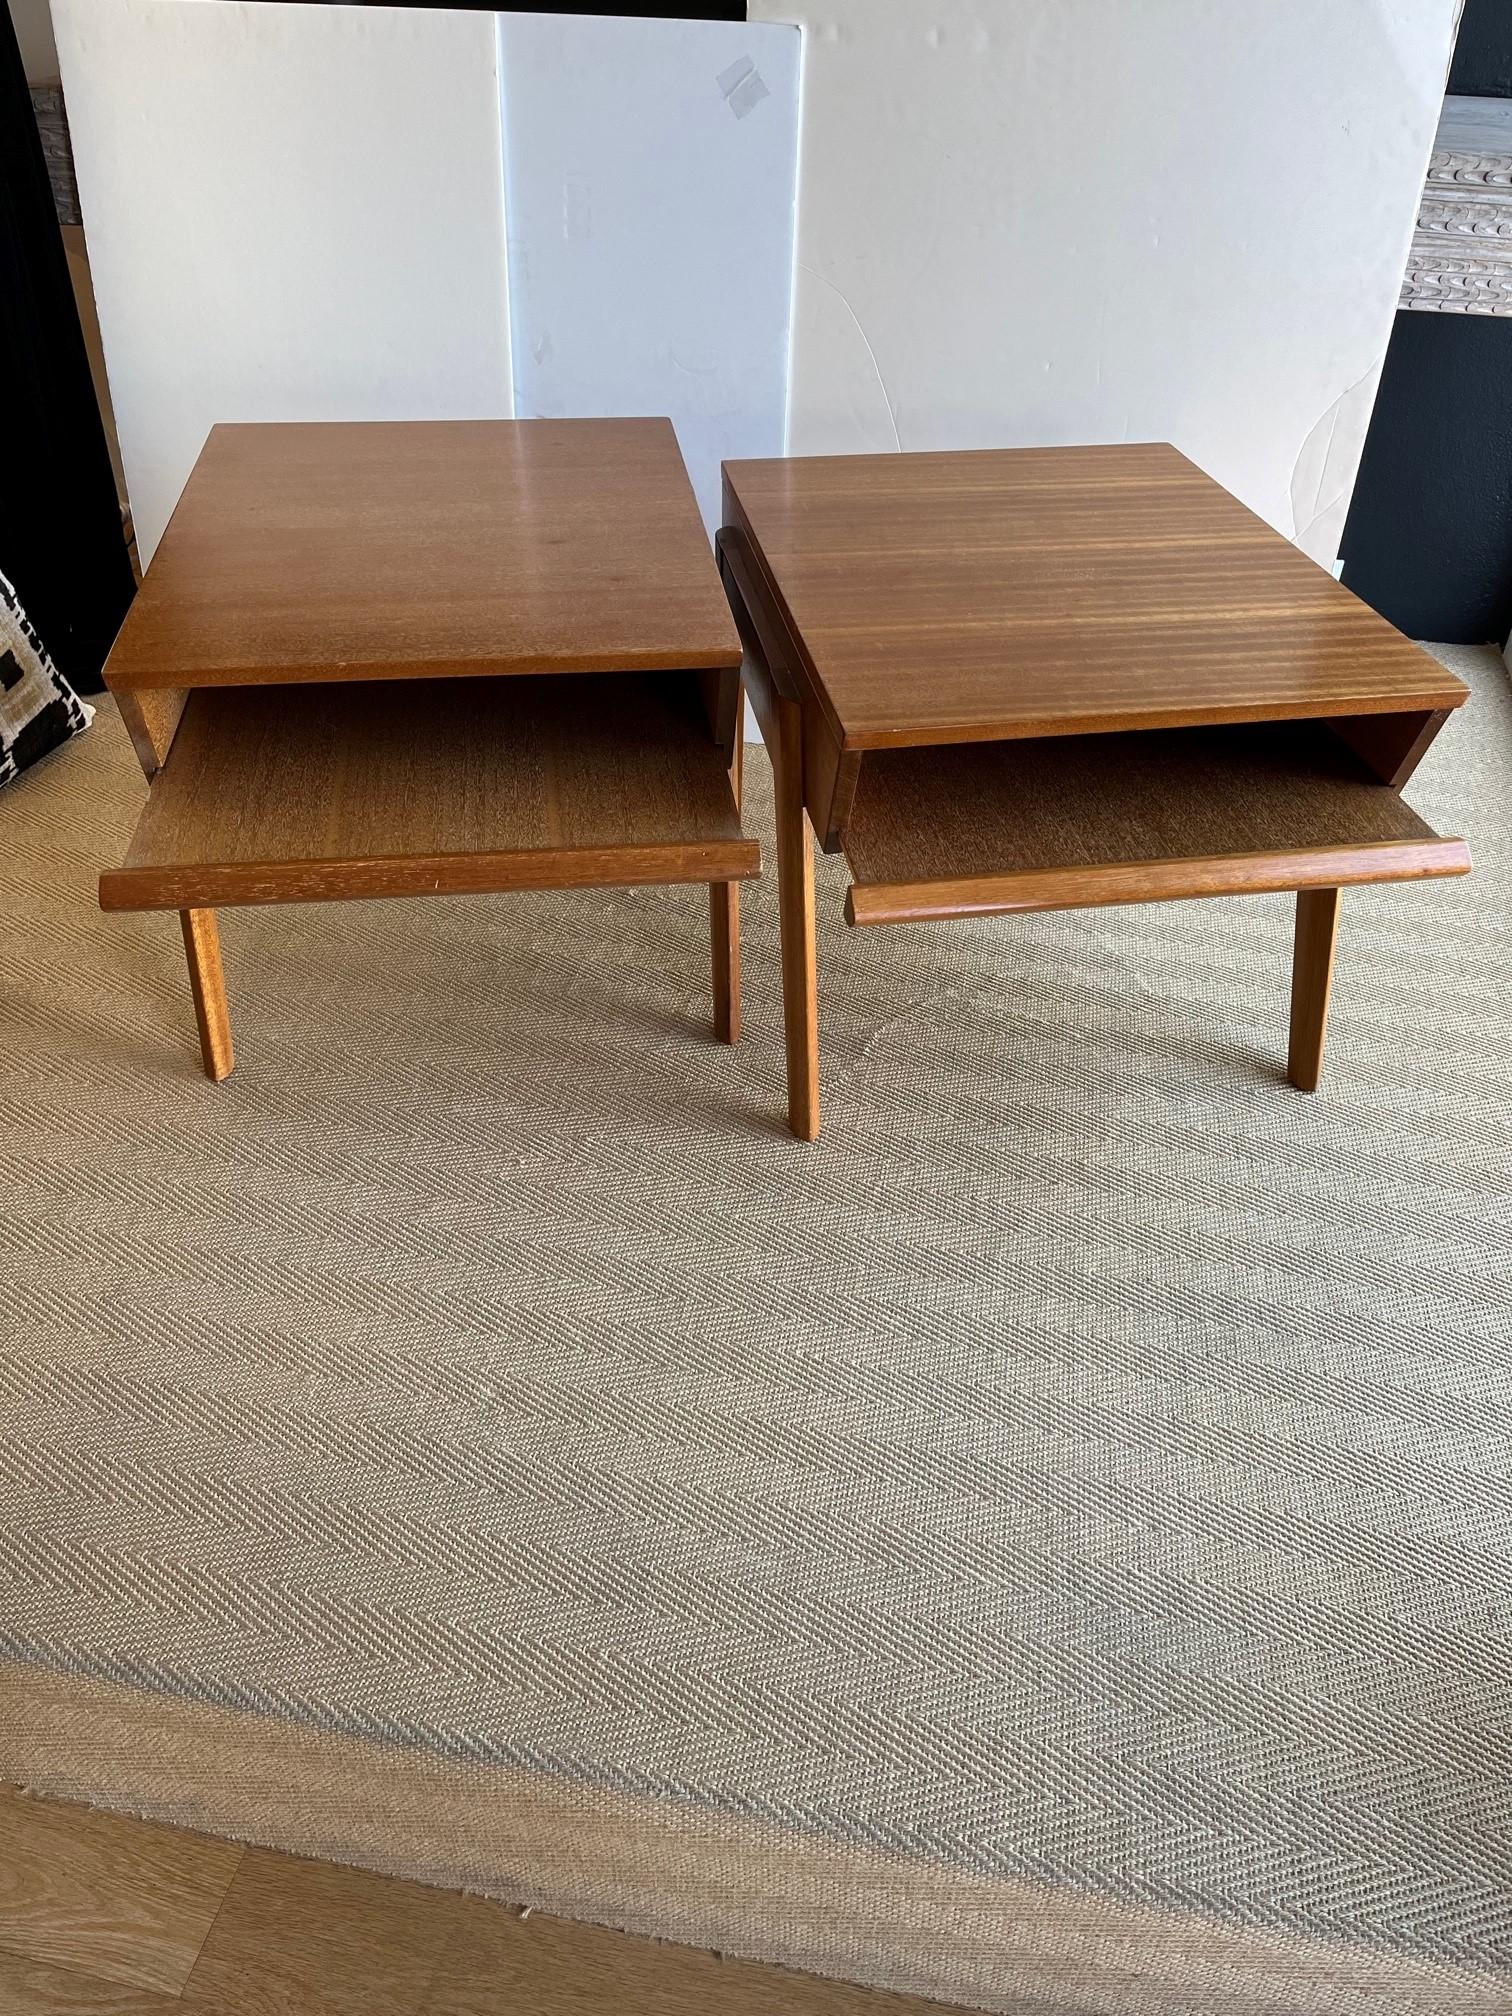 Pair of Mid-Century Modern Tray Side Table Designed by John Keal  In Good Condition For Sale In Los Angeles, CA